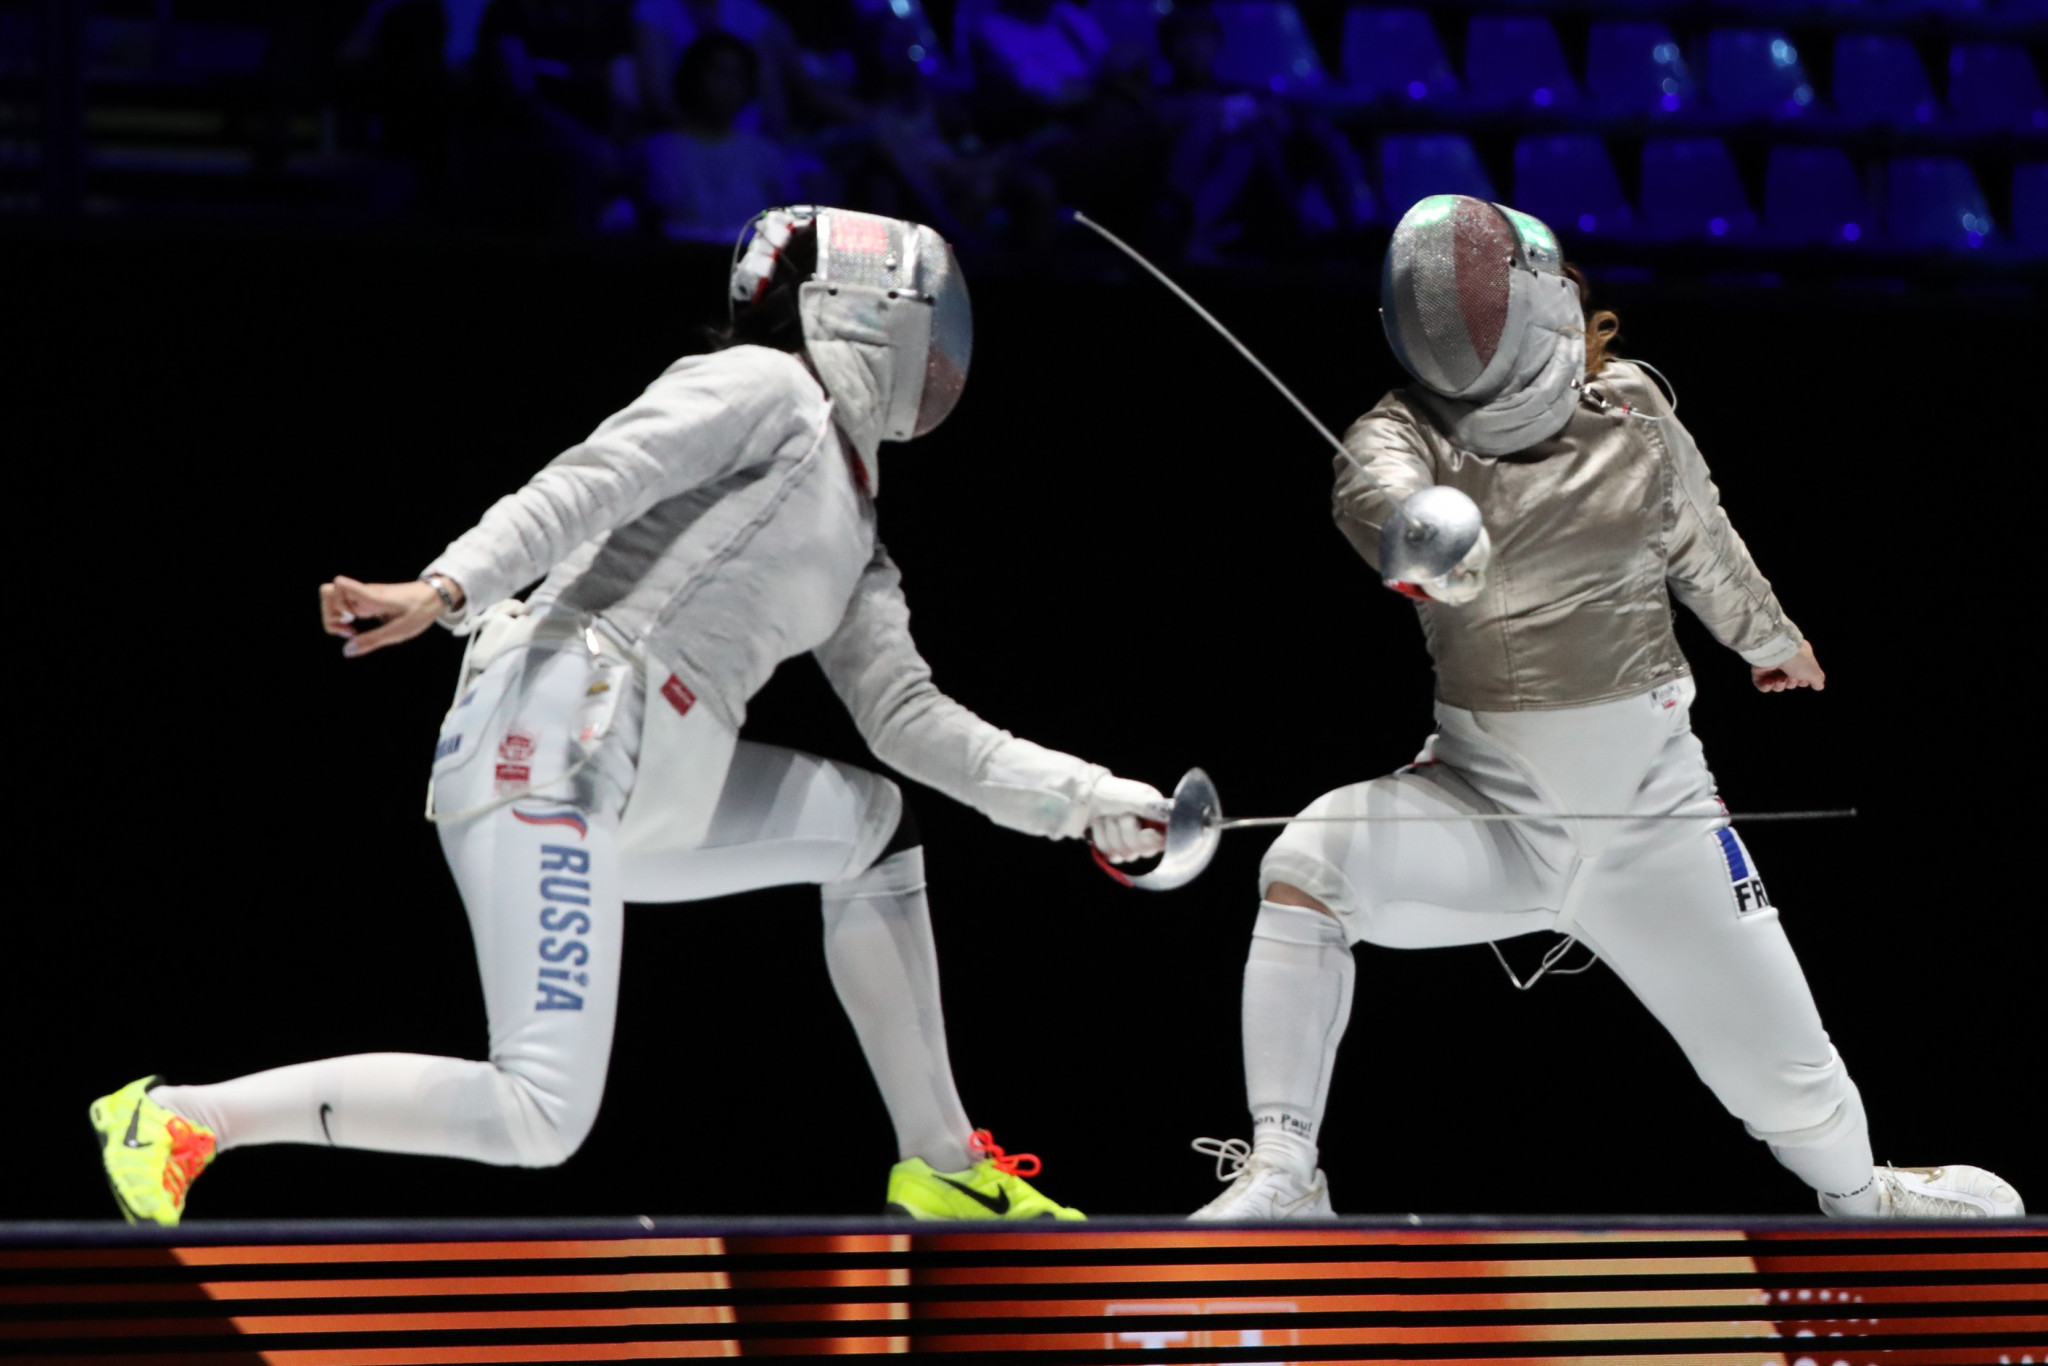  Russian Fencing Federation President Ilgar Mammadov has admitted that all of Russia’s leading fencers are in law enforcement agencies ©Getty Images